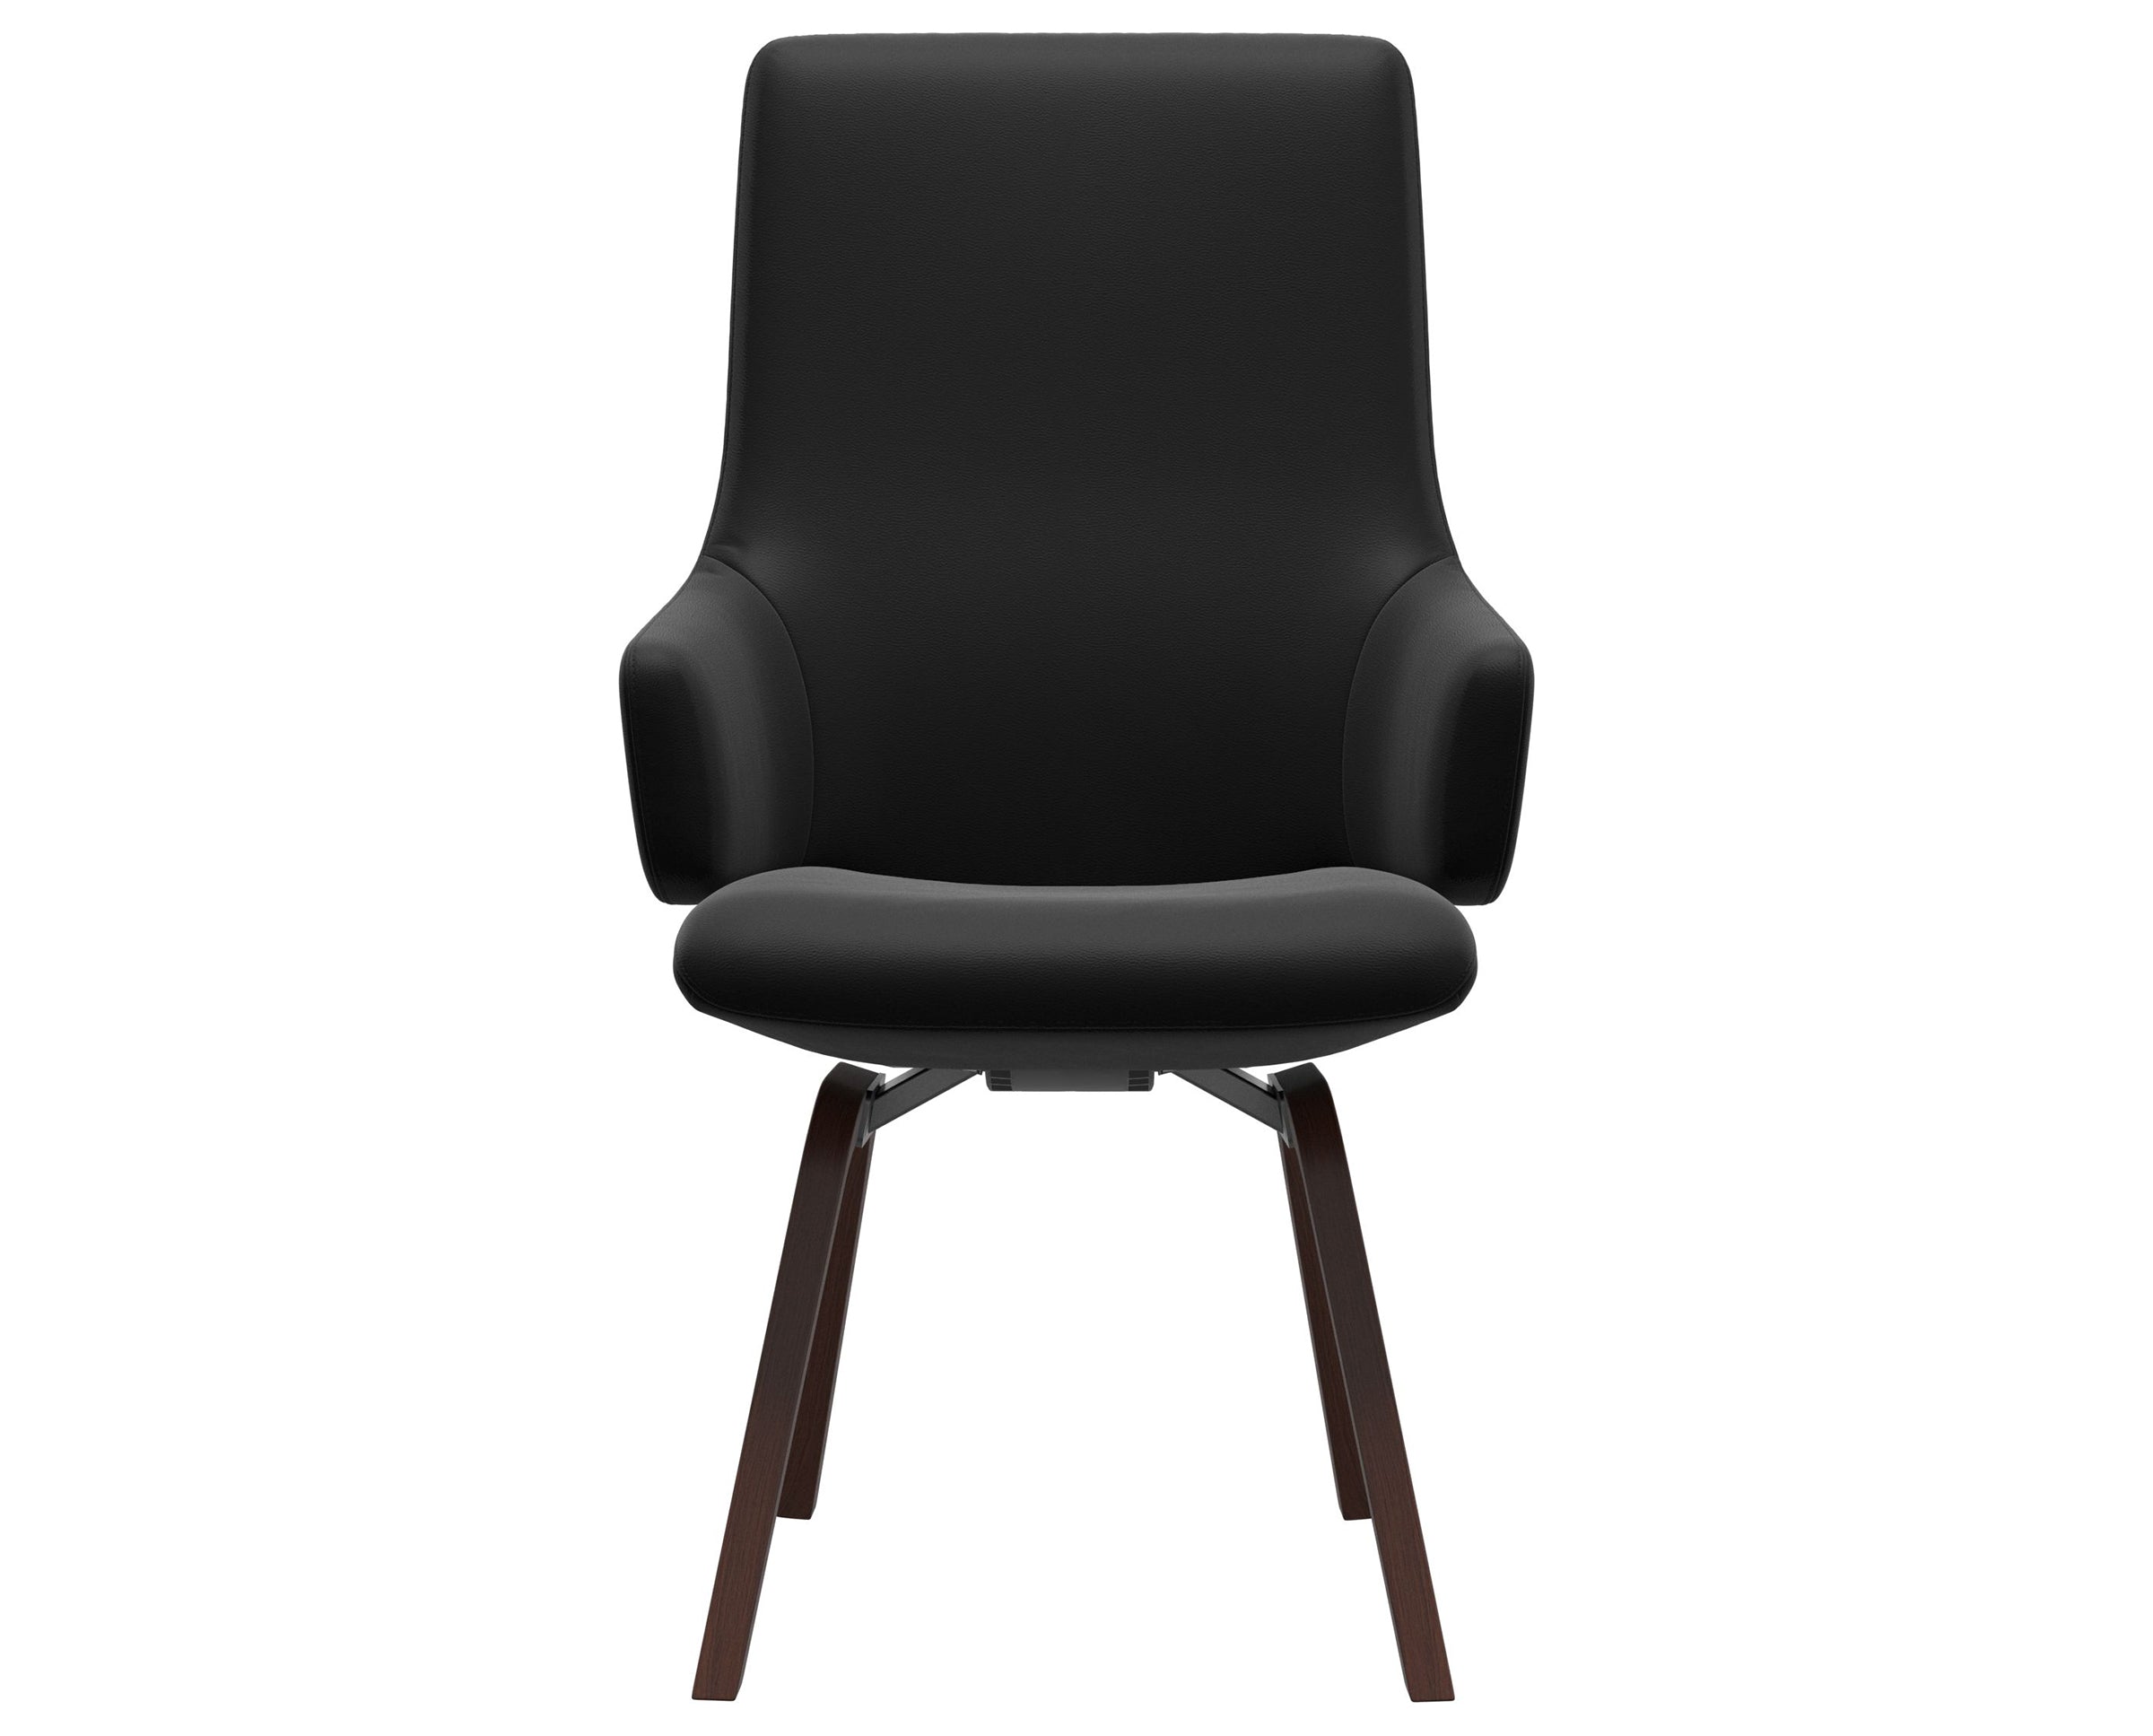 Paloma Leather Black and Walnut Base | Stressless Laurel High Back D200 Dining Chair w/Arms | Valley Ridge Furniture